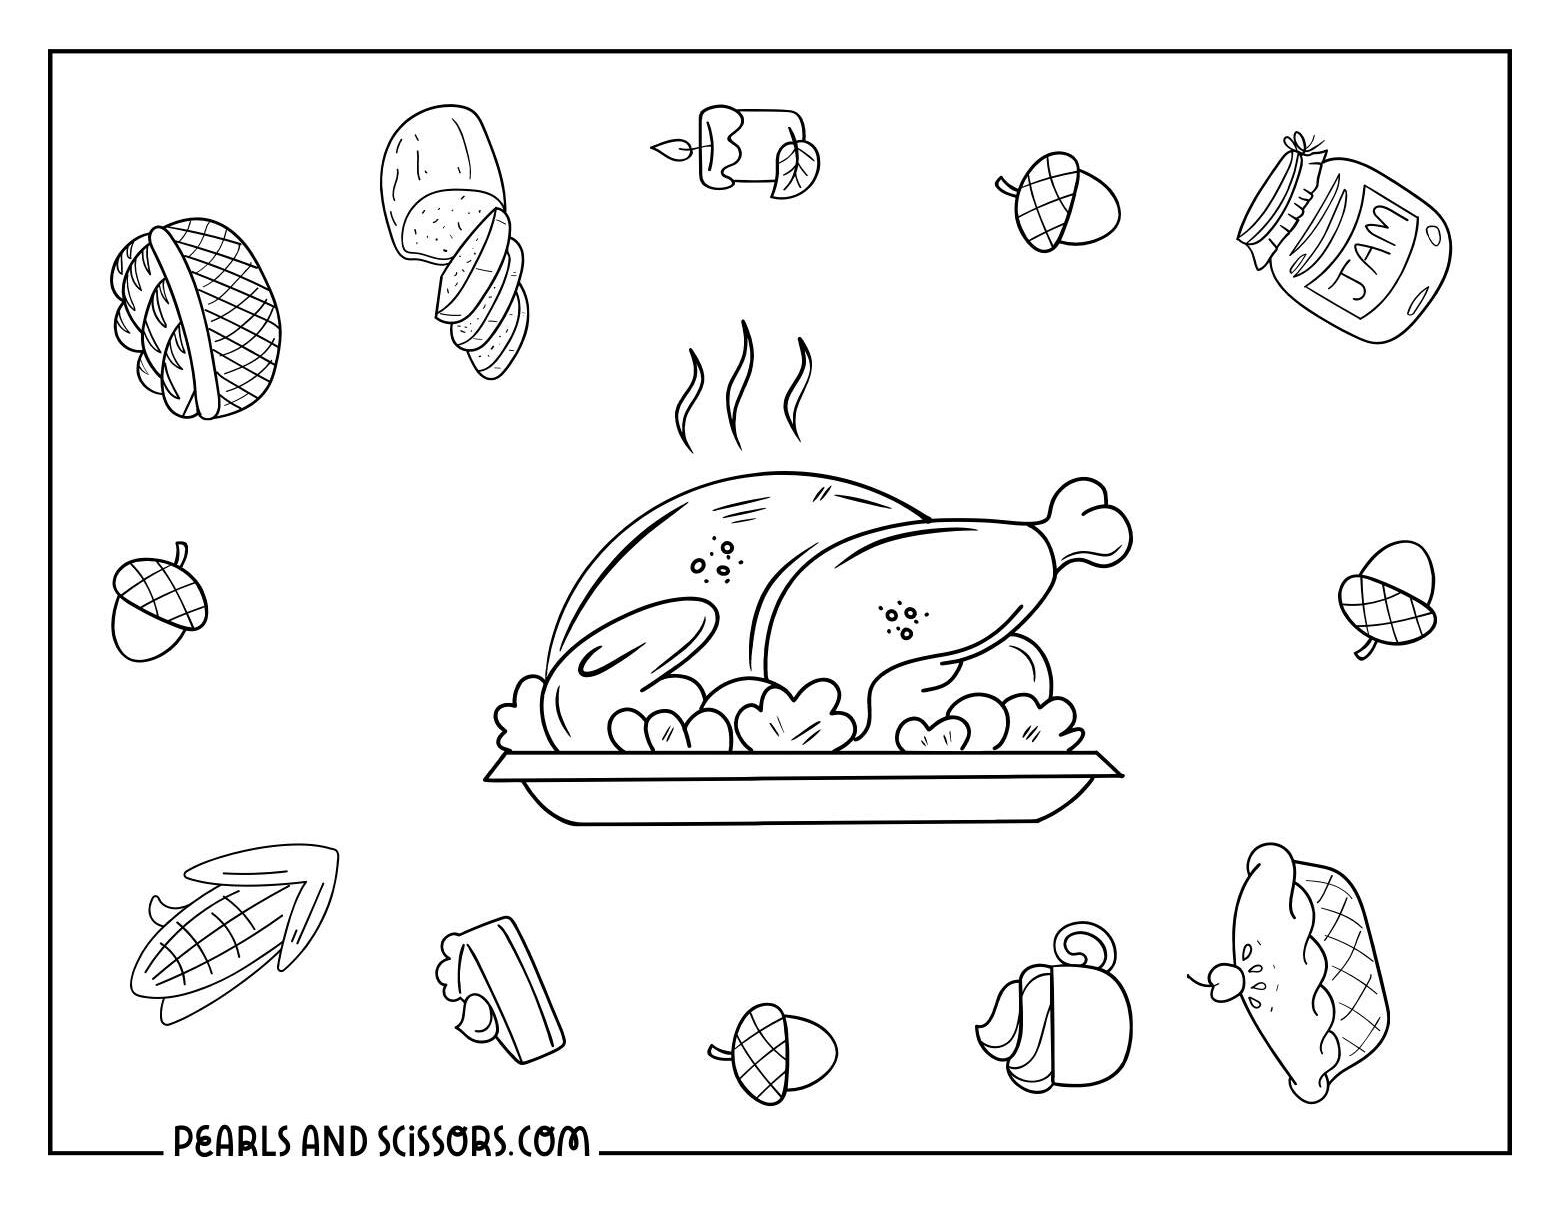 Roast turkey with thanksgiving food coloring page.